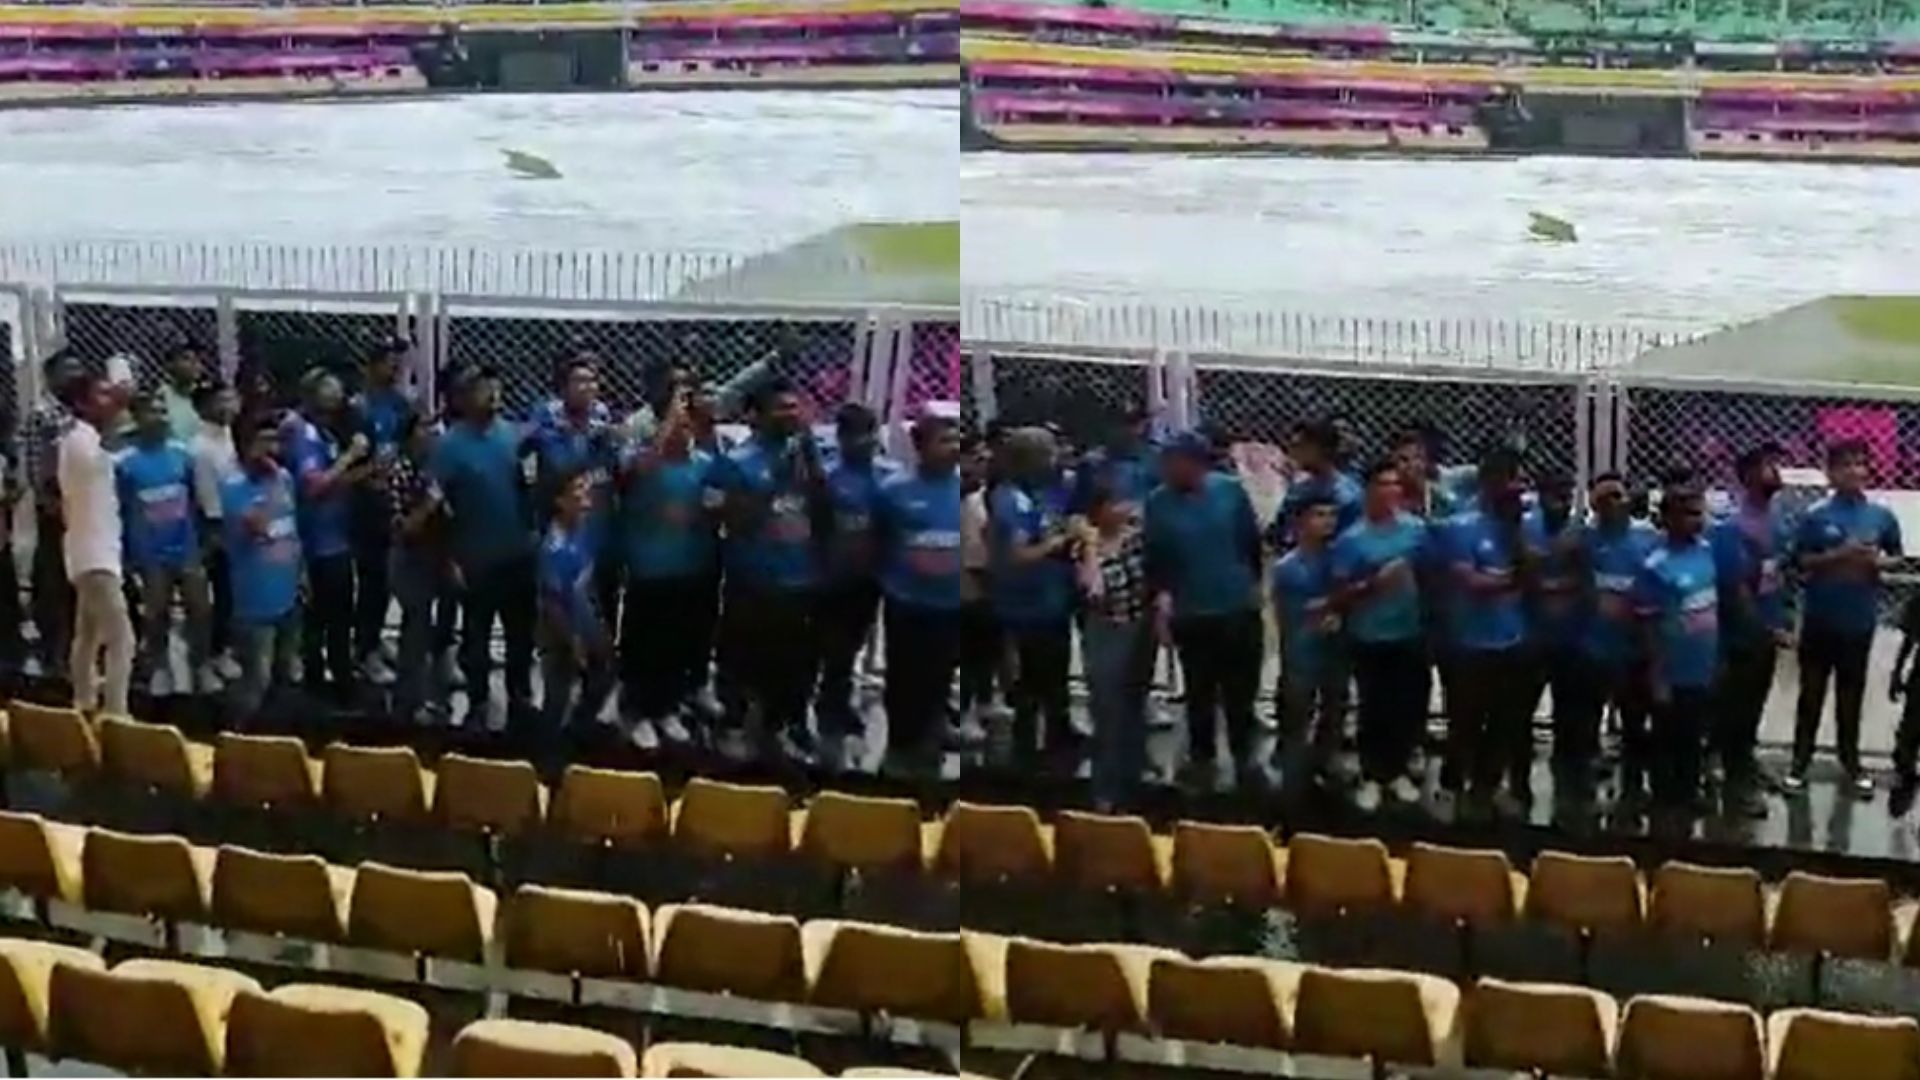 Snippets from the video where fans are cheering on in the rain (P.C.:X)